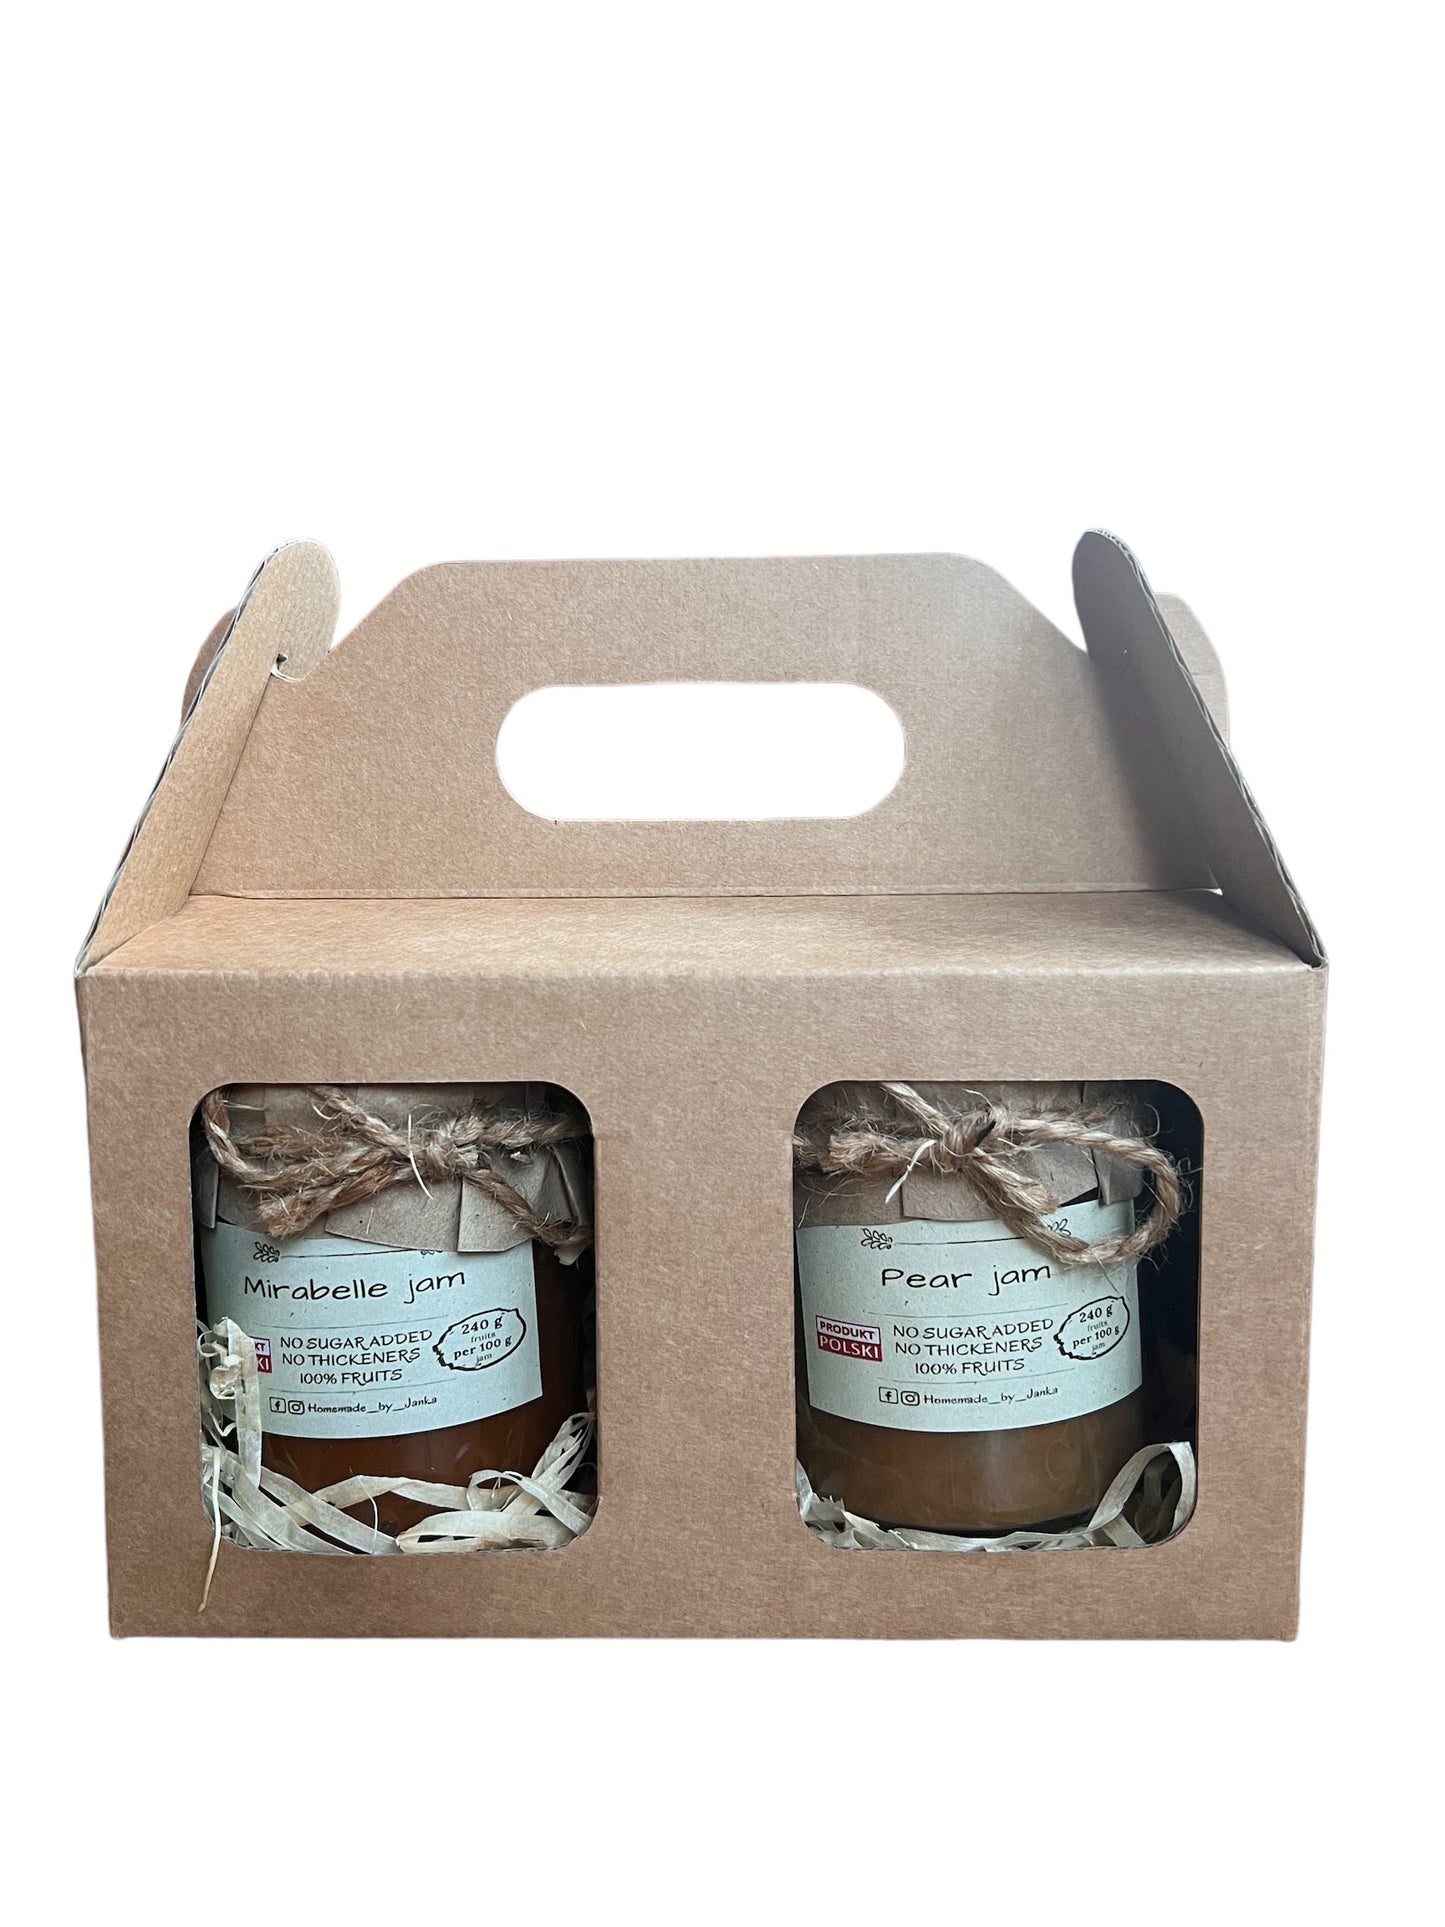 Homemade by Janka  Gift set of 2 jams in a box | Mirabelle Jam, Pear Jam | 2 x 240g